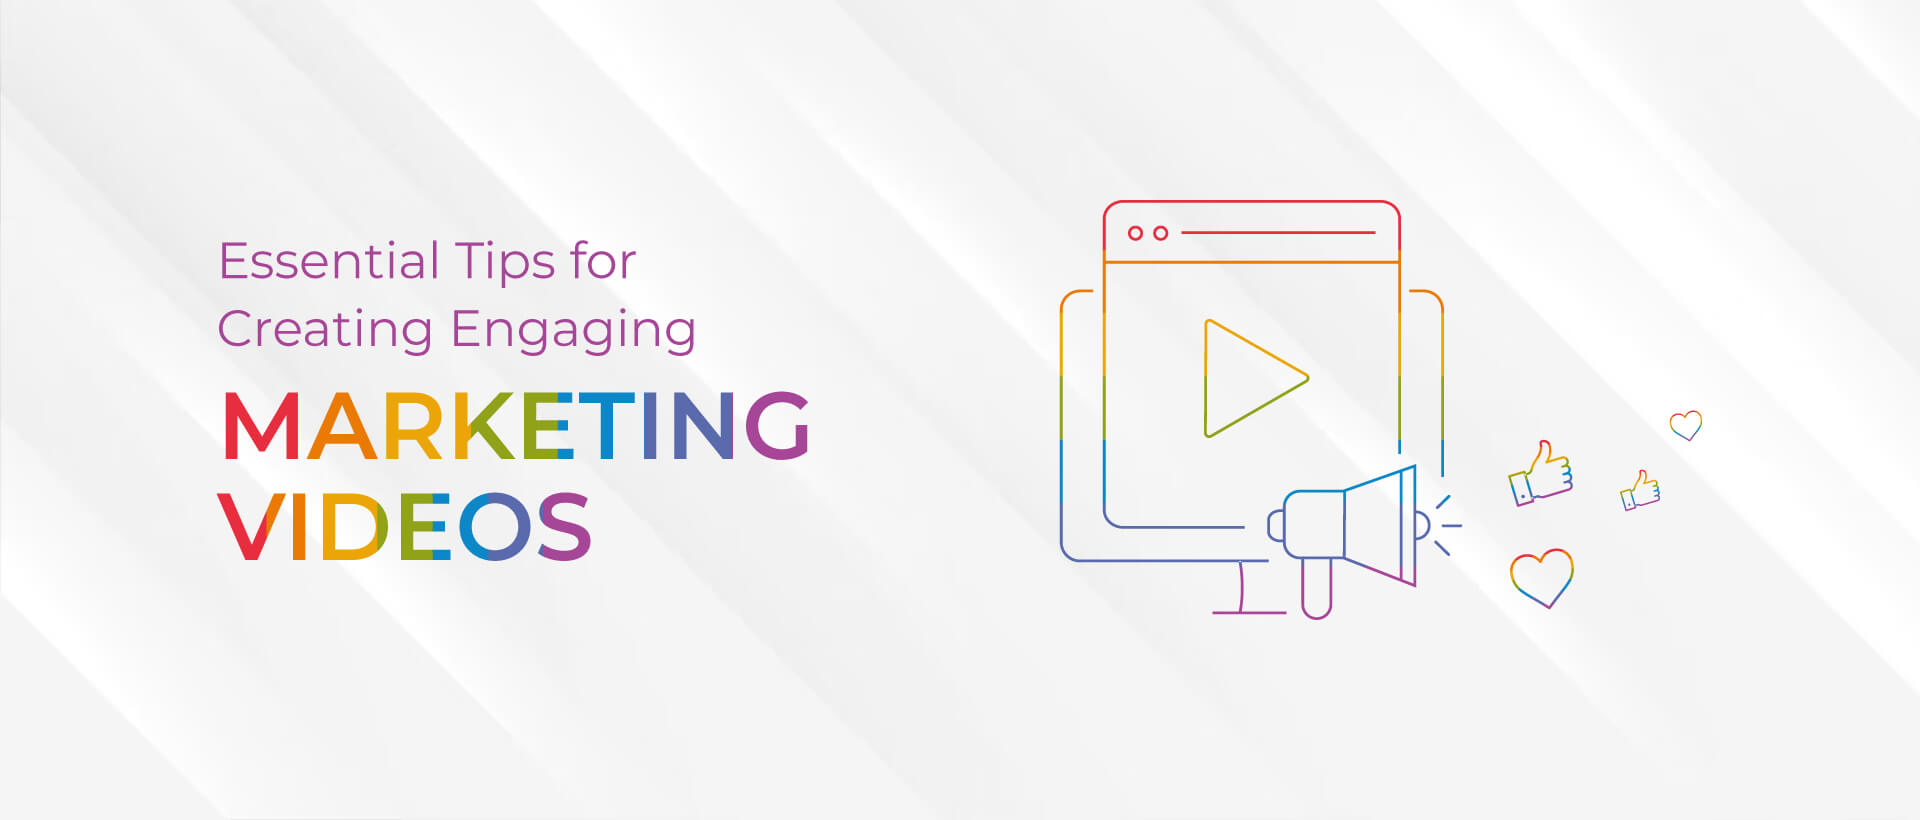 Essential Tips for Creating Engaging Marketing Videos